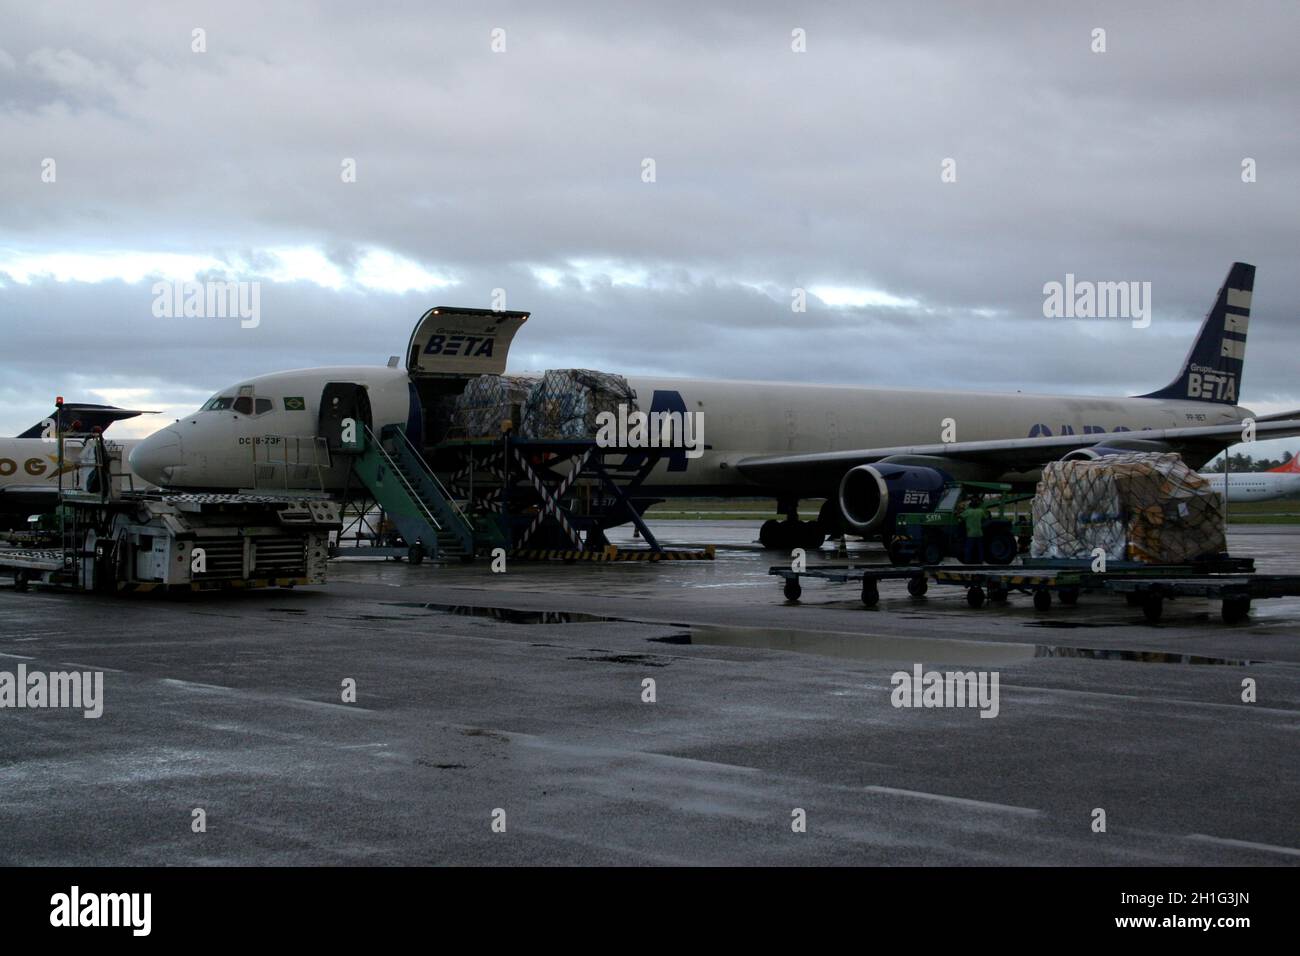 salvador, bahia / brazil - may 15, 2007: Douglas DC-8 freighter aircraft from the airline Beta seen in loading procedure at Salvador airport. Stock Photo